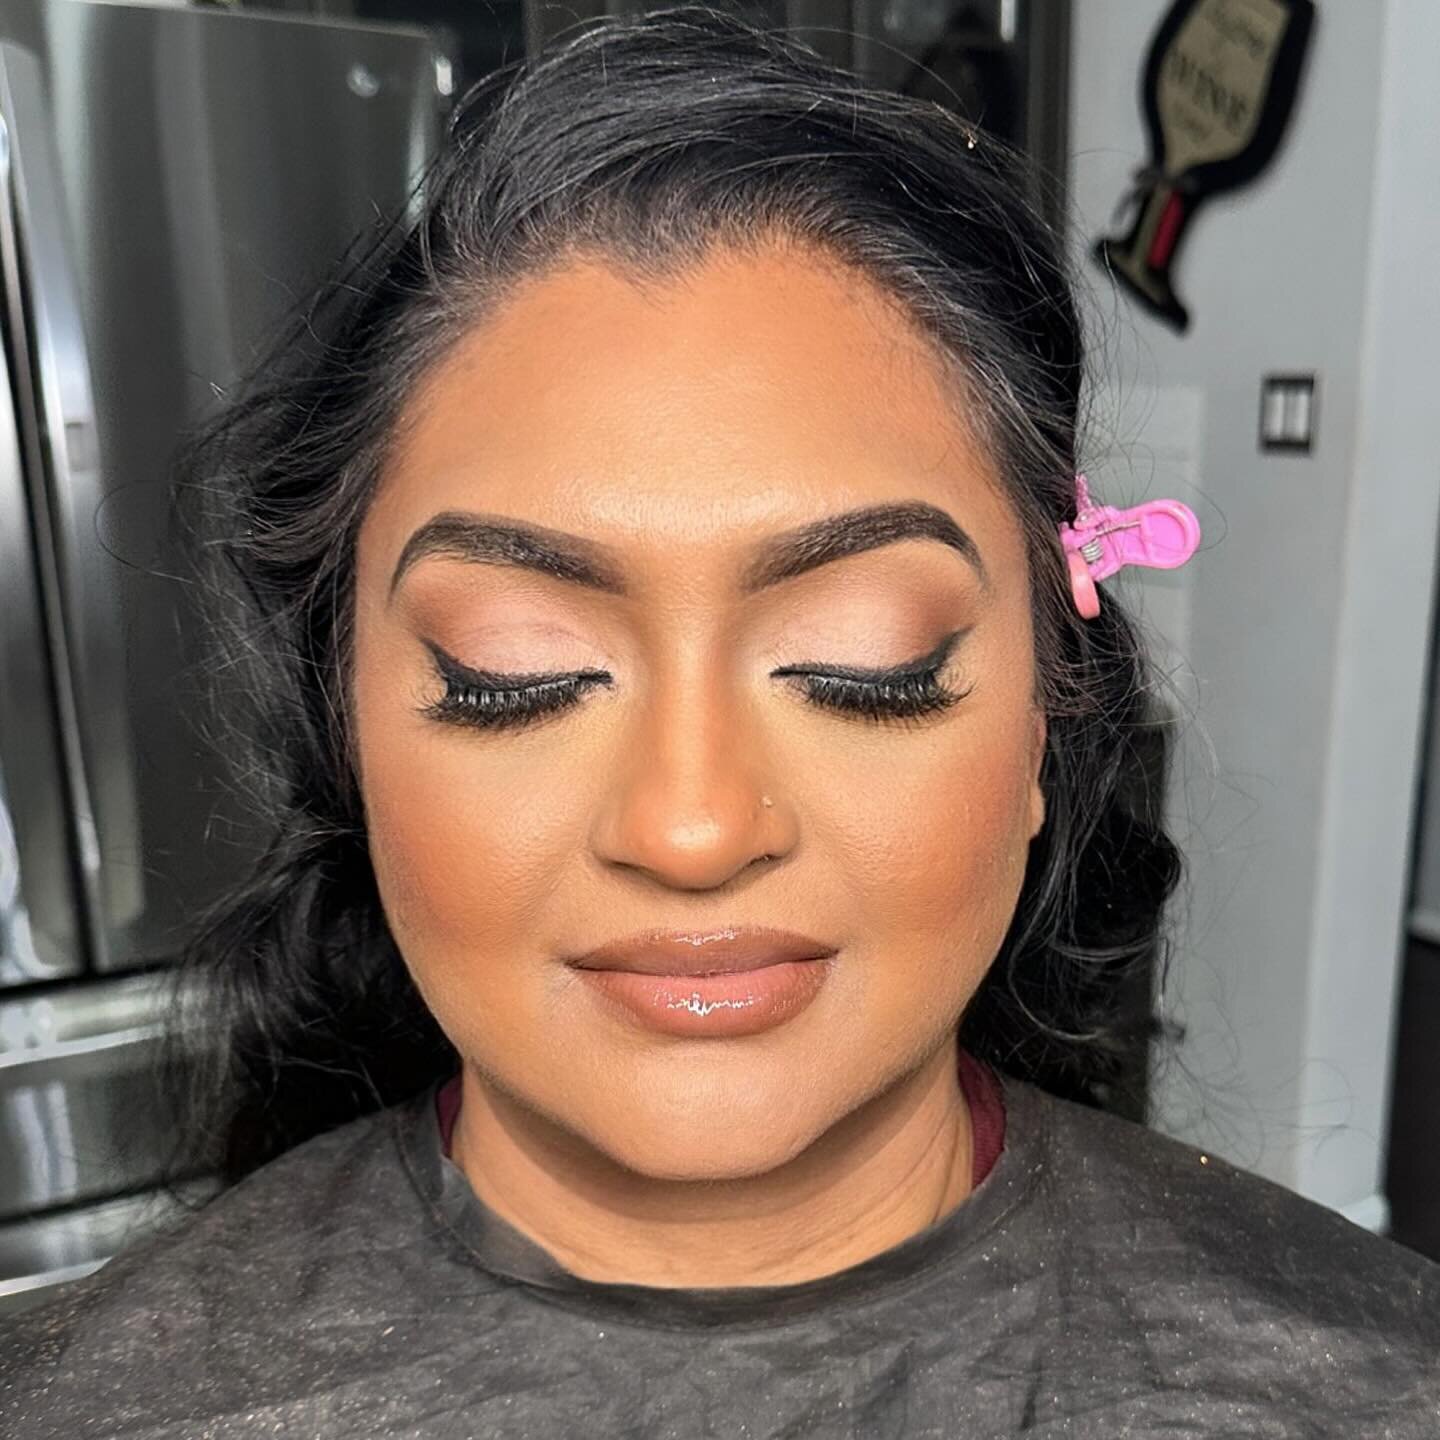 Confidence is the best makeup. But a little makeup doesn&rsquo;t hurt! 😉 Book your session for that extra boost. #ConfidentlyBeautiful #makeupboost 
Soft Glam does it every time 🧚🏽&zwj;♀️
Tell me what you think....like, comment, or share 🙏
.
.
Pr